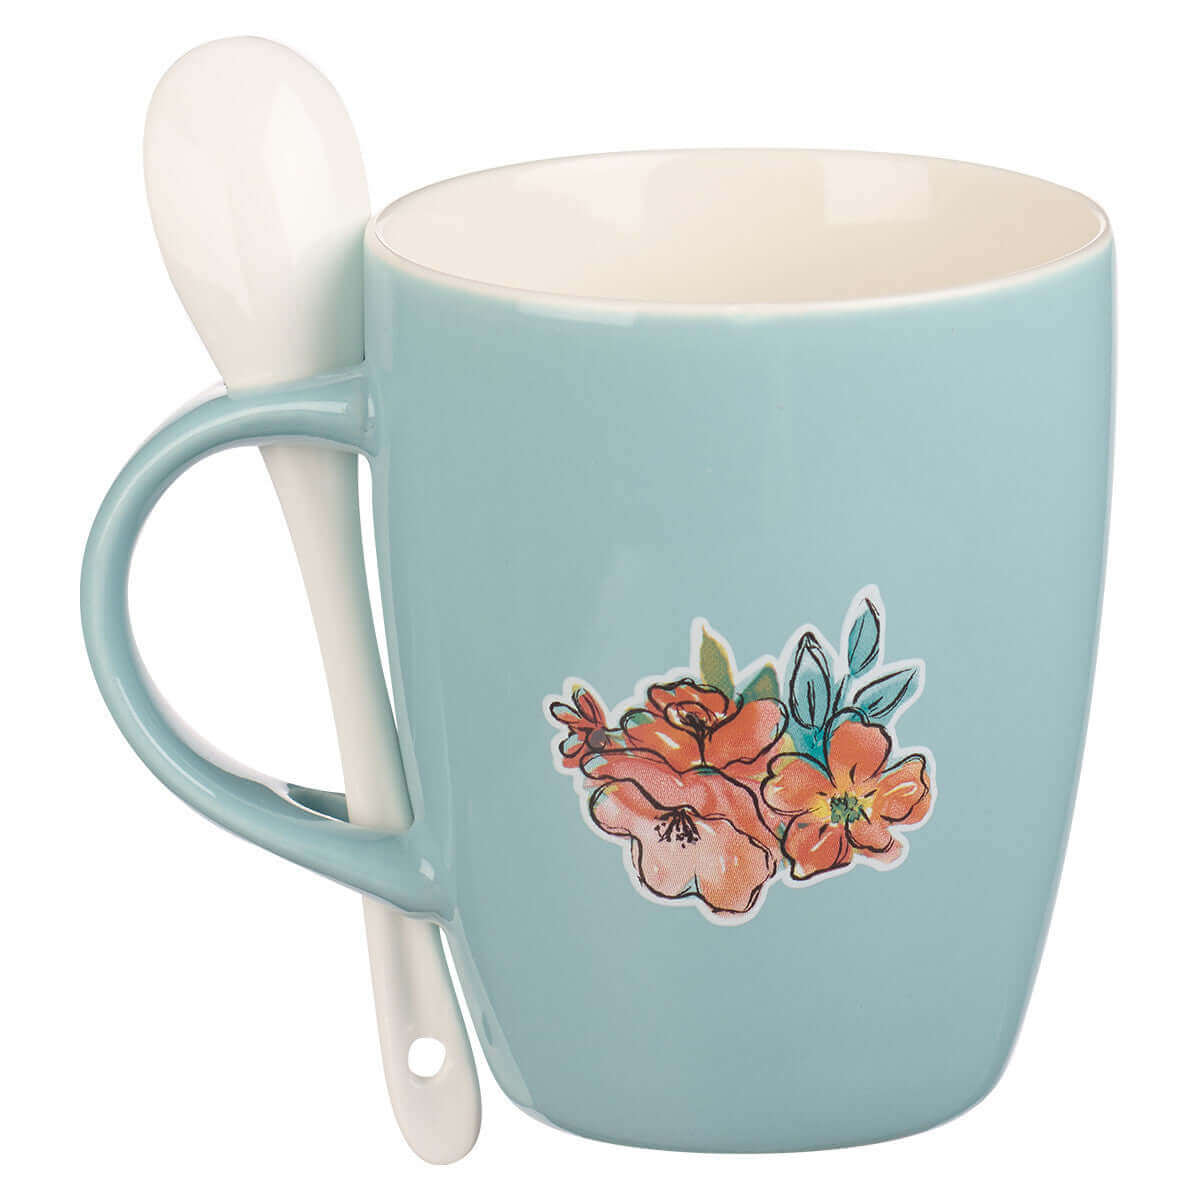 Bless You and Keep You Teal Ceramic Coffee Mug with Spoon - Numbers 6:24 | 2FruitBearers